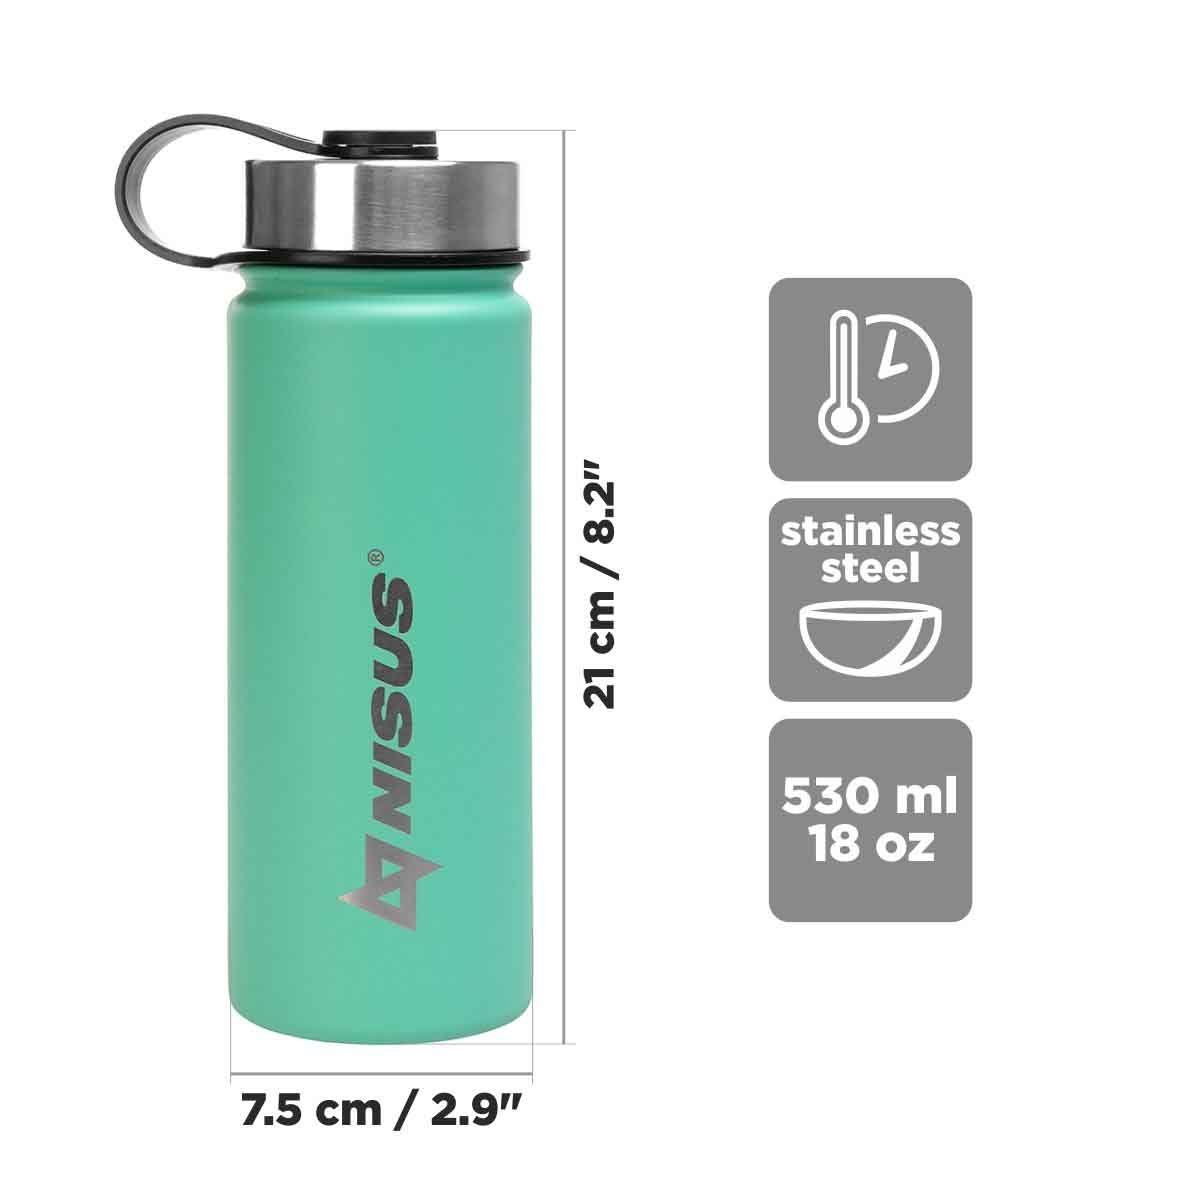 Stainless Steel Insulated Sport Water Bottle with 3 Lid Types, 18 oz is 8.2 inches high and 2.9 inches wide